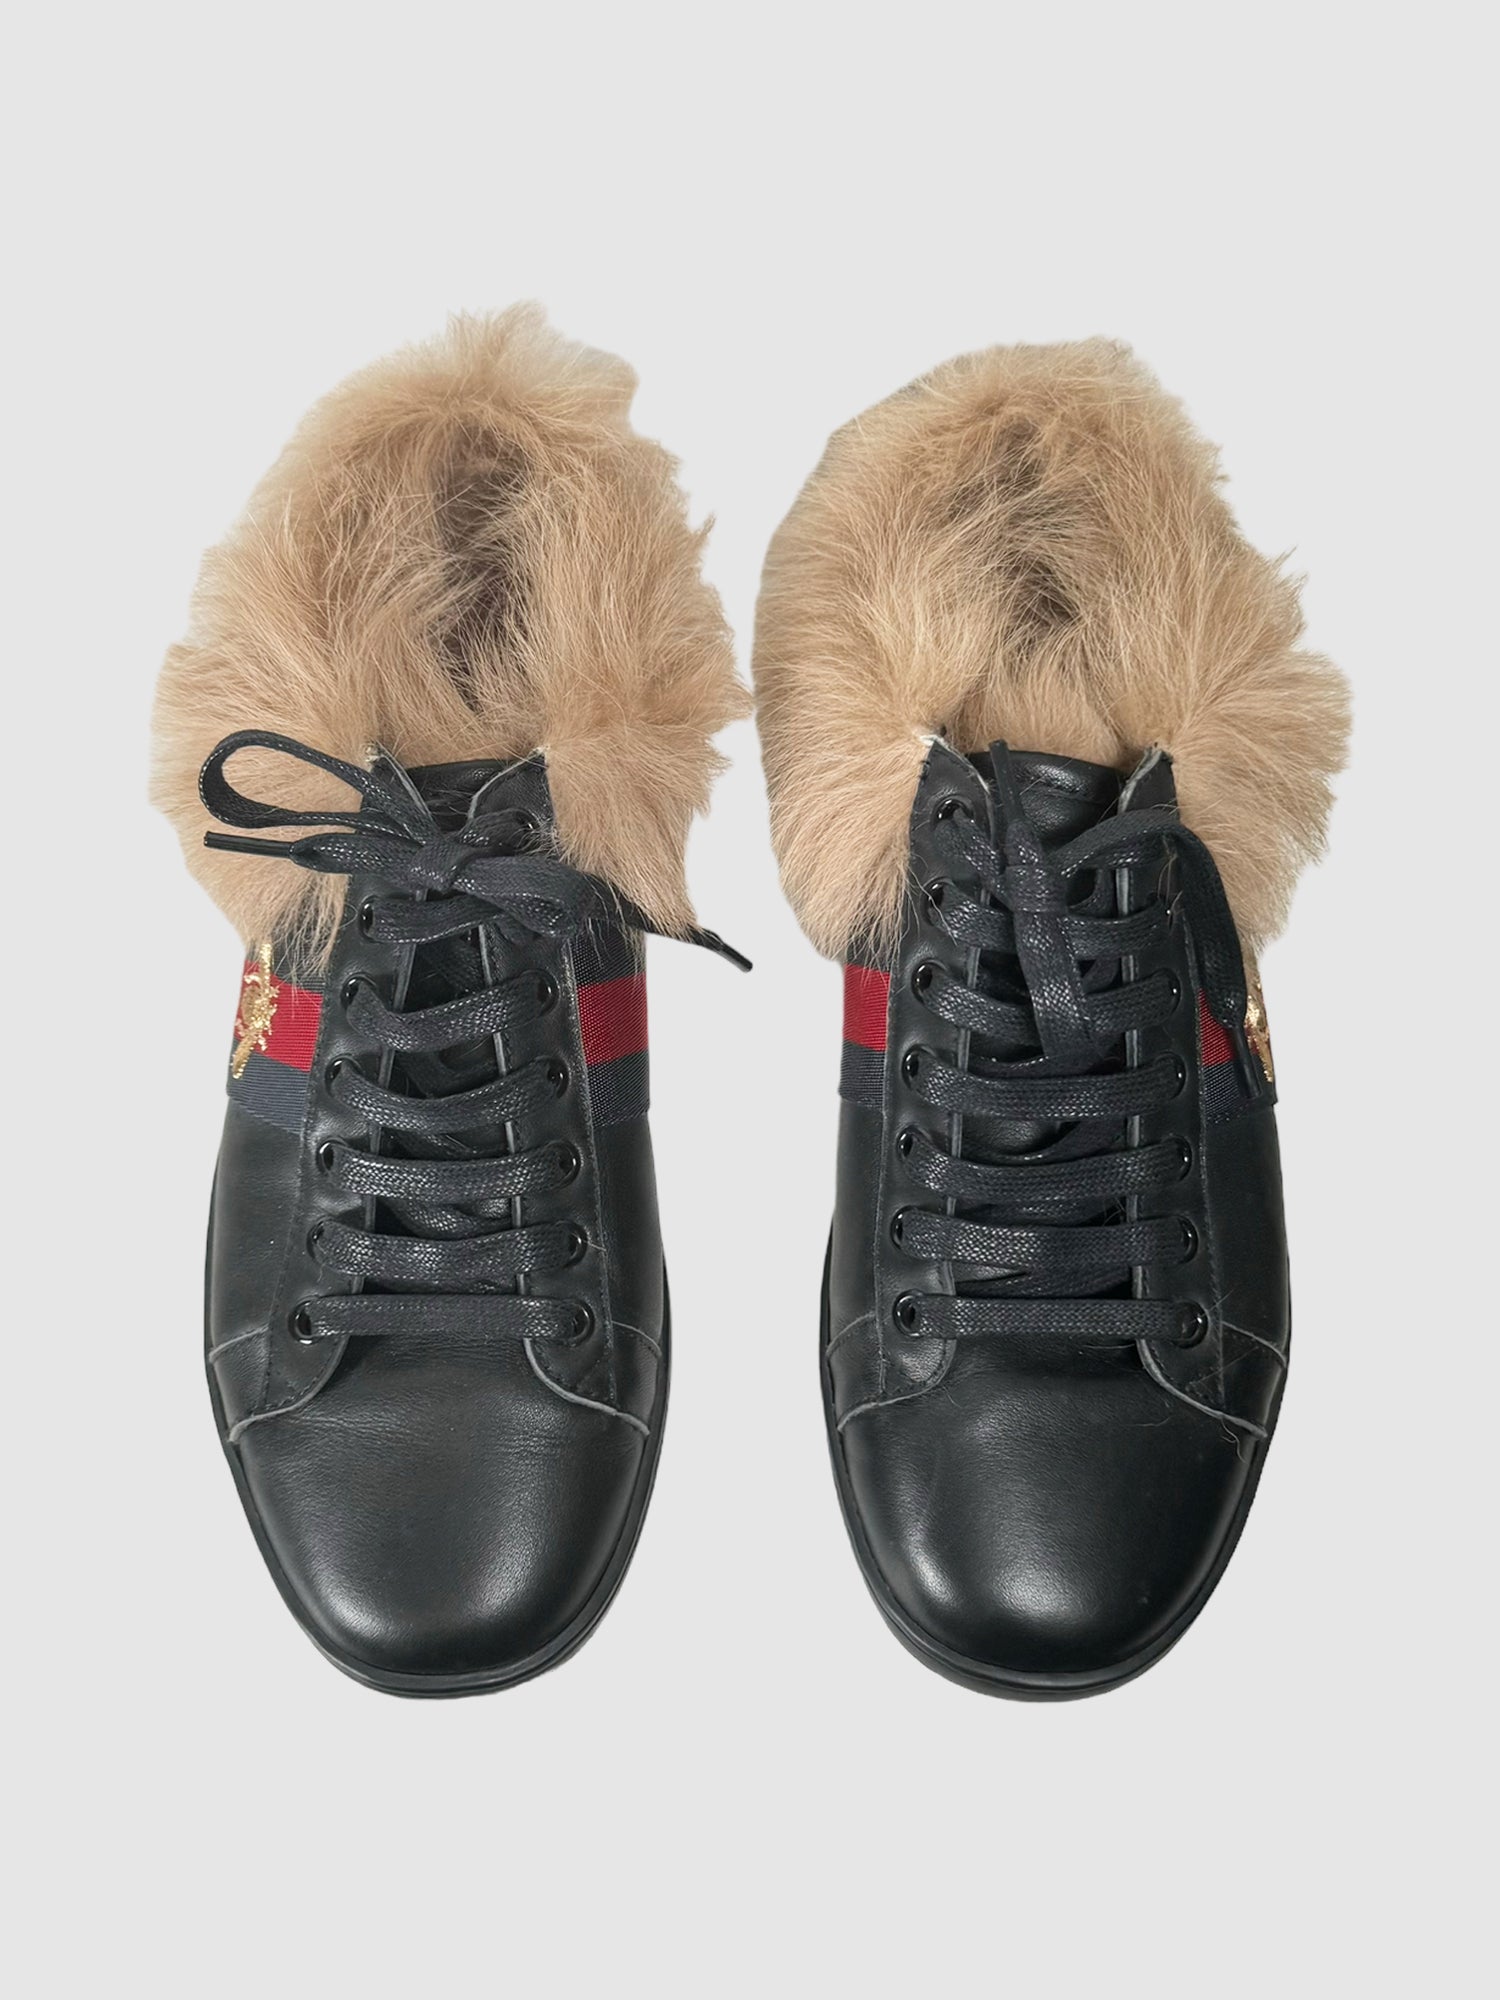 Gucci Black Fur Lined Lace-Up Sneakers with Gold Bee Embroidery Design